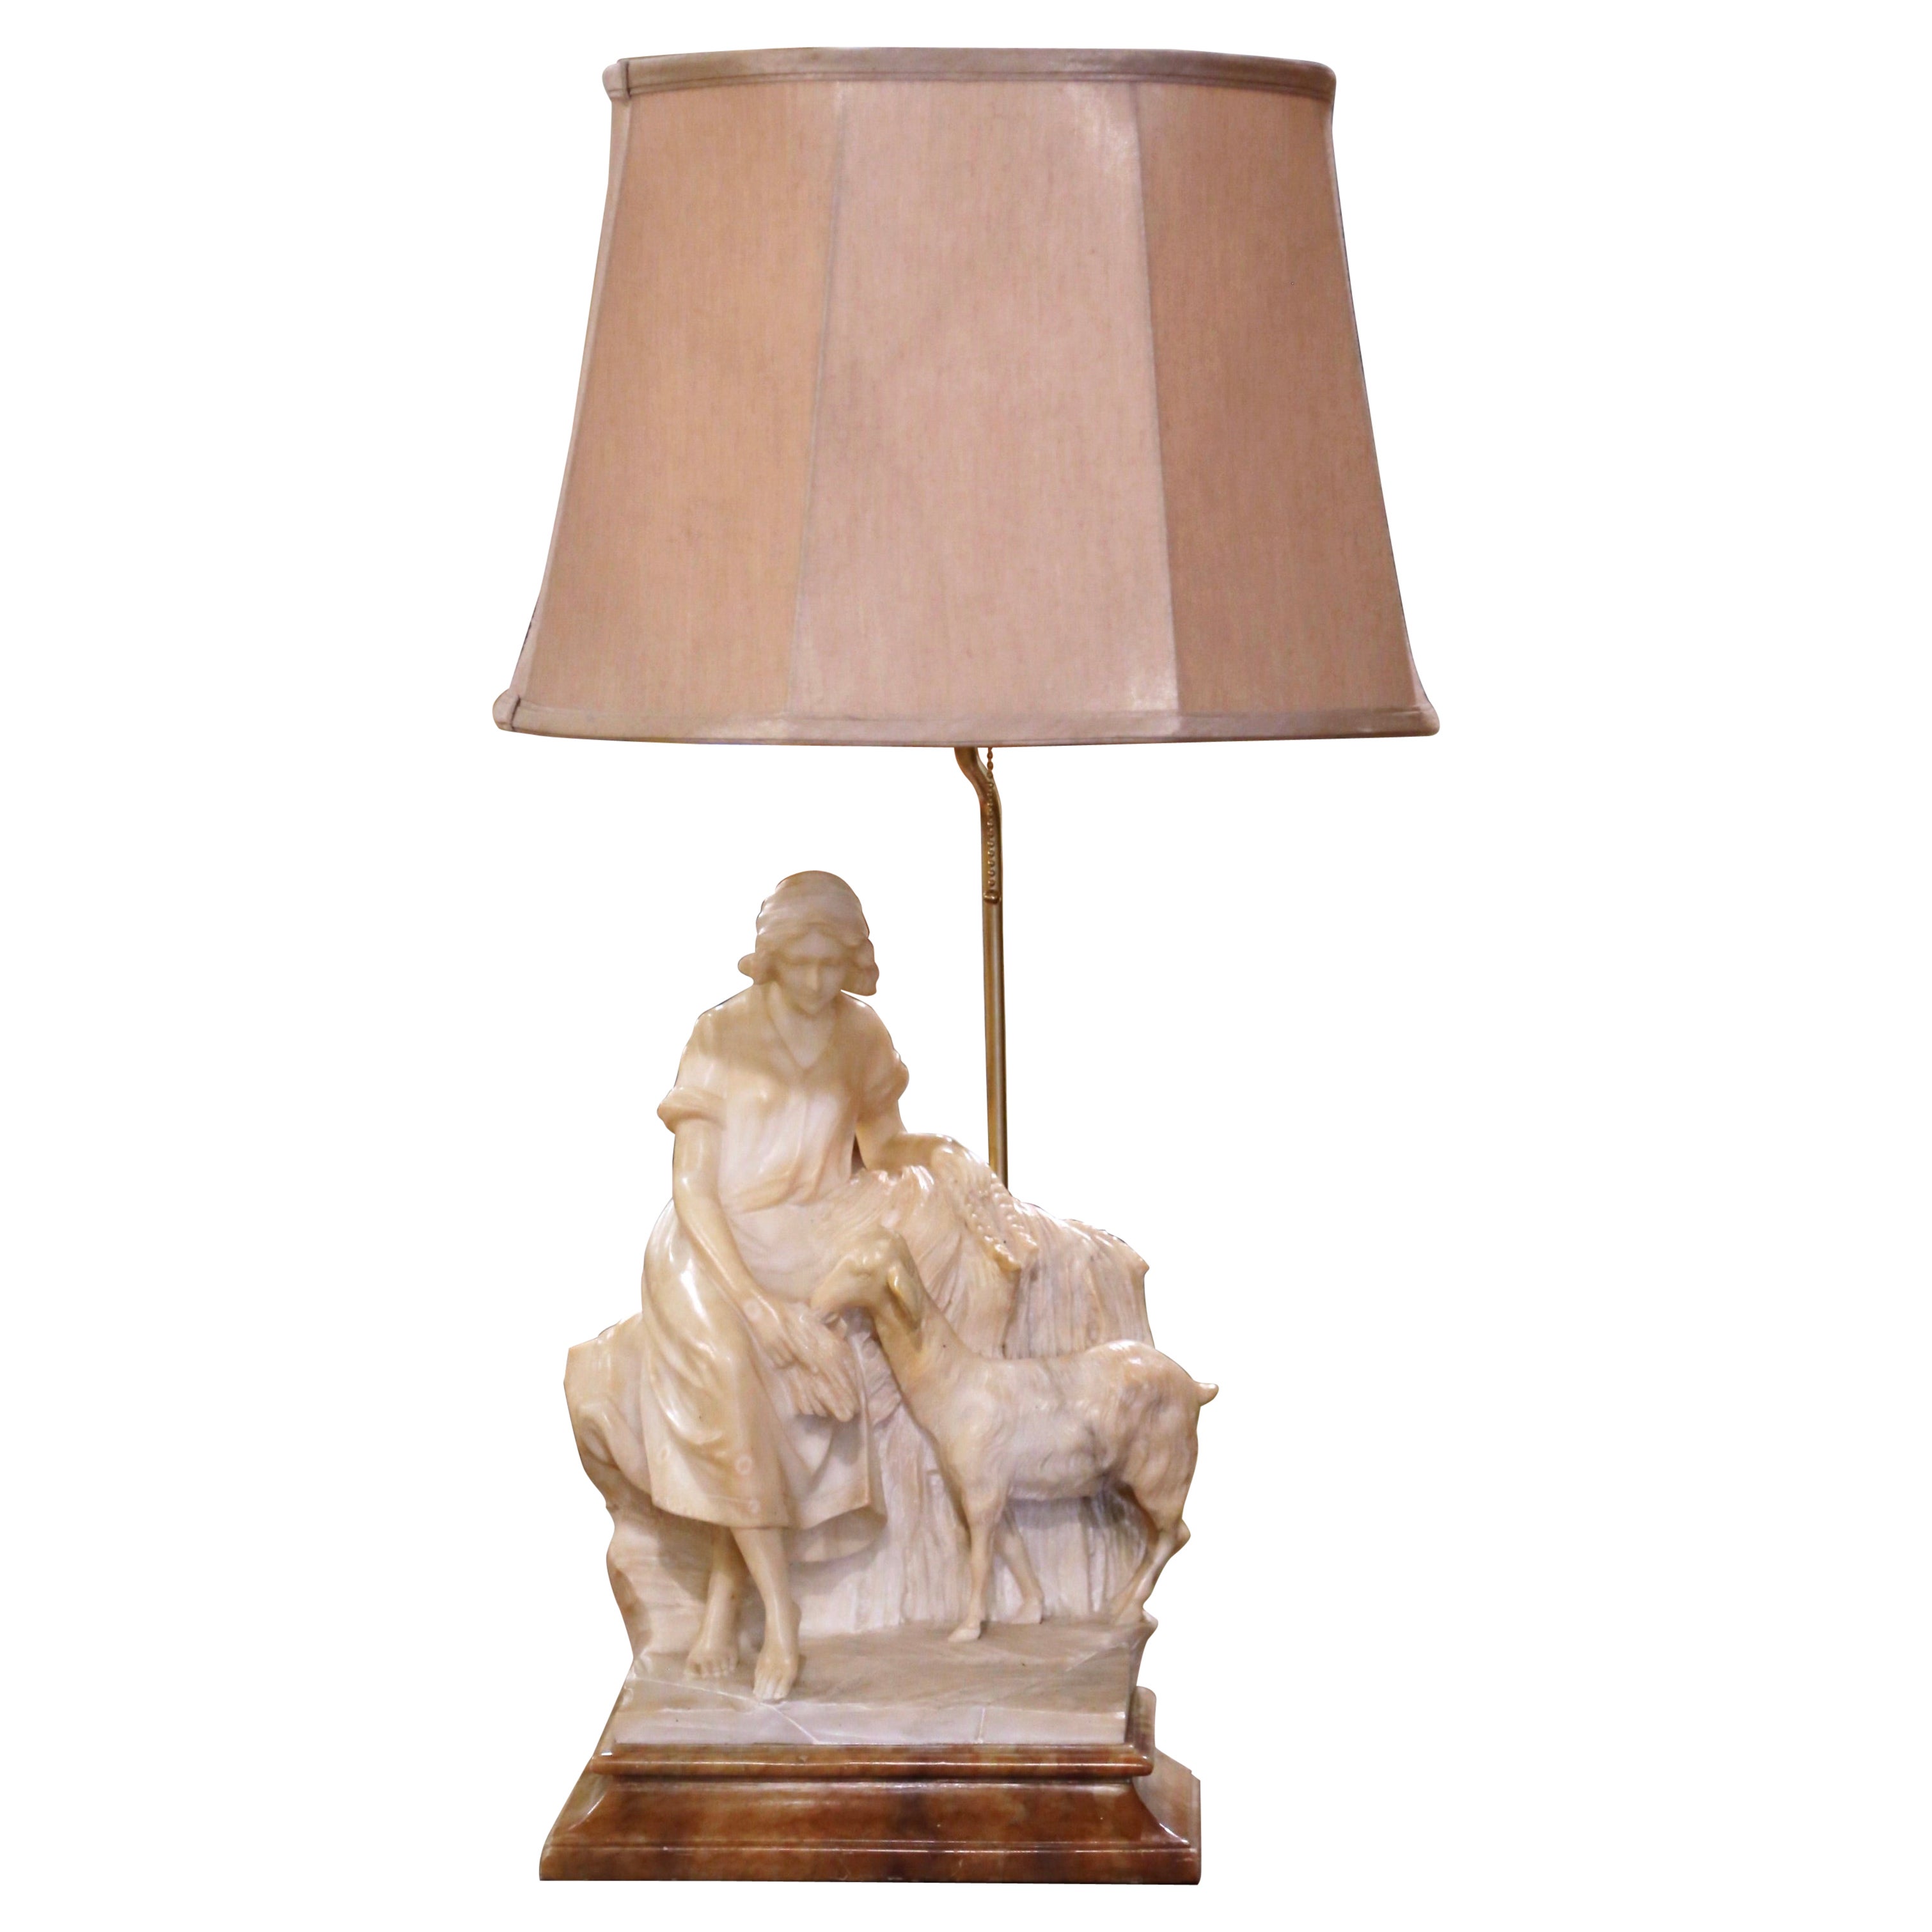  19th-Century Italian Carved Alabaster Lamp on Marble Base Signed R. Colivicchi